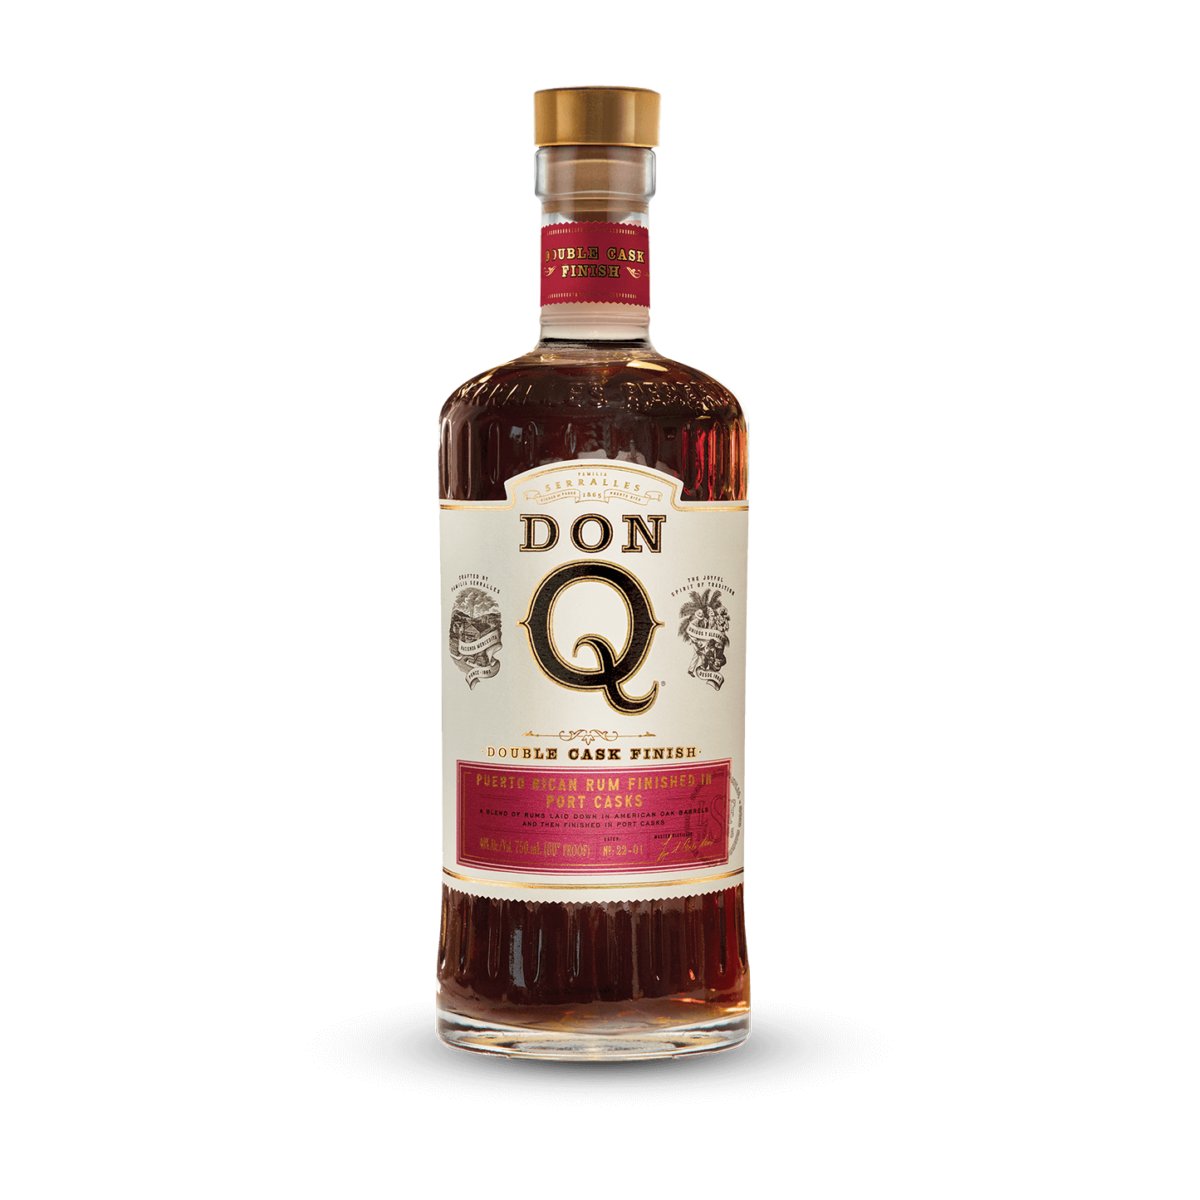 Check out our award-winning Double Aged Port Cask Finish